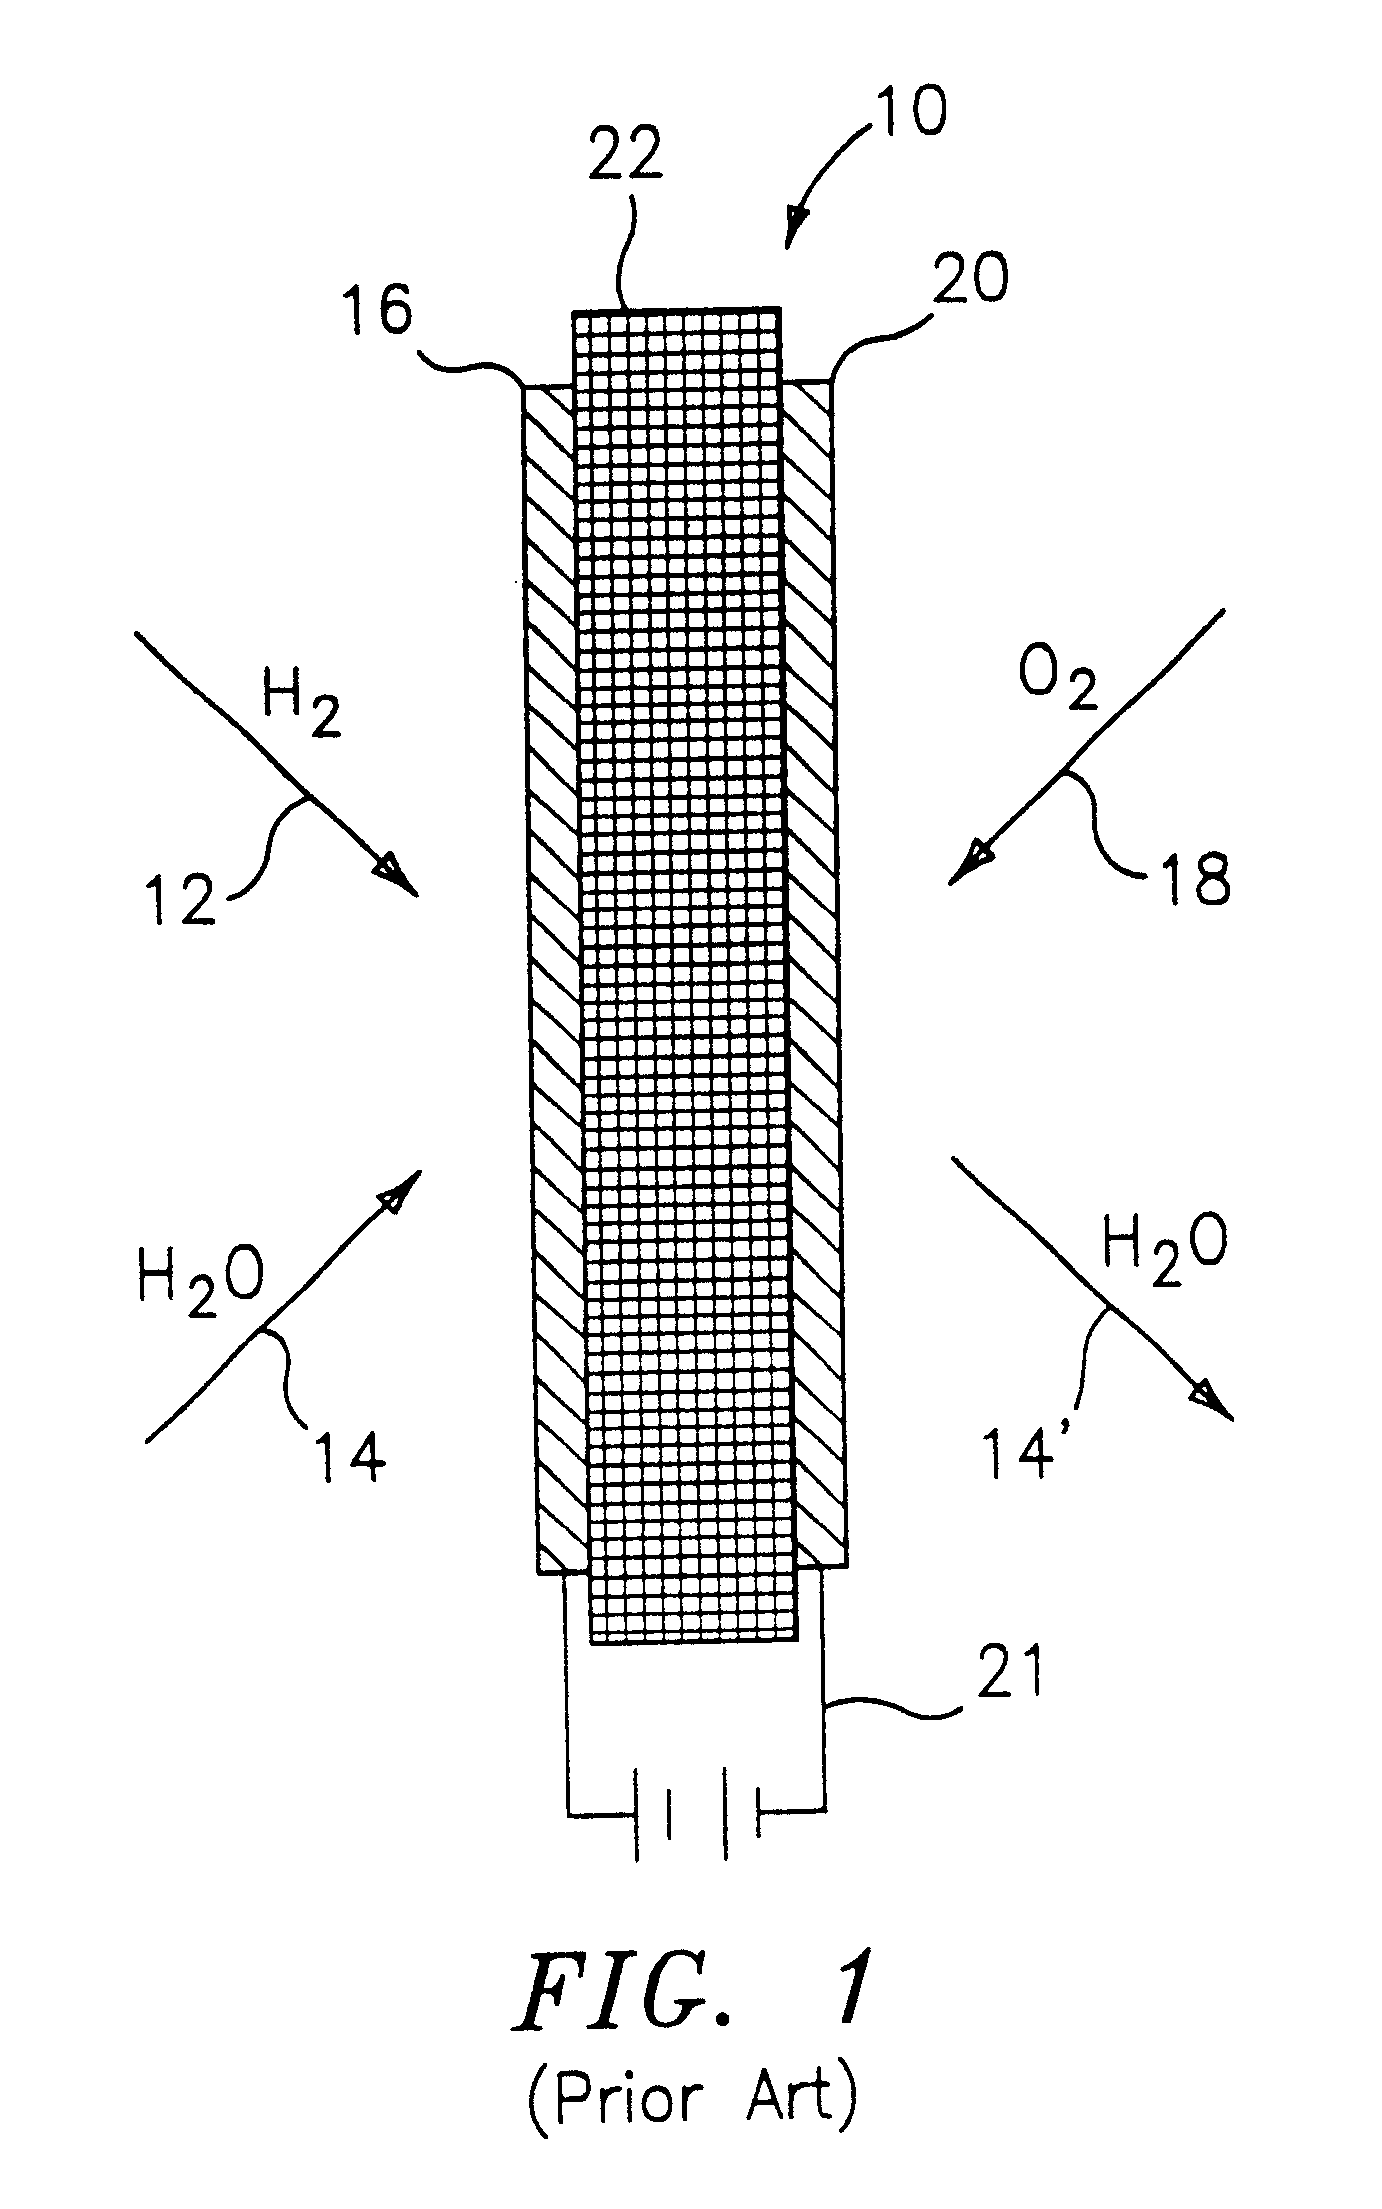 Low gravity electrochemical cell